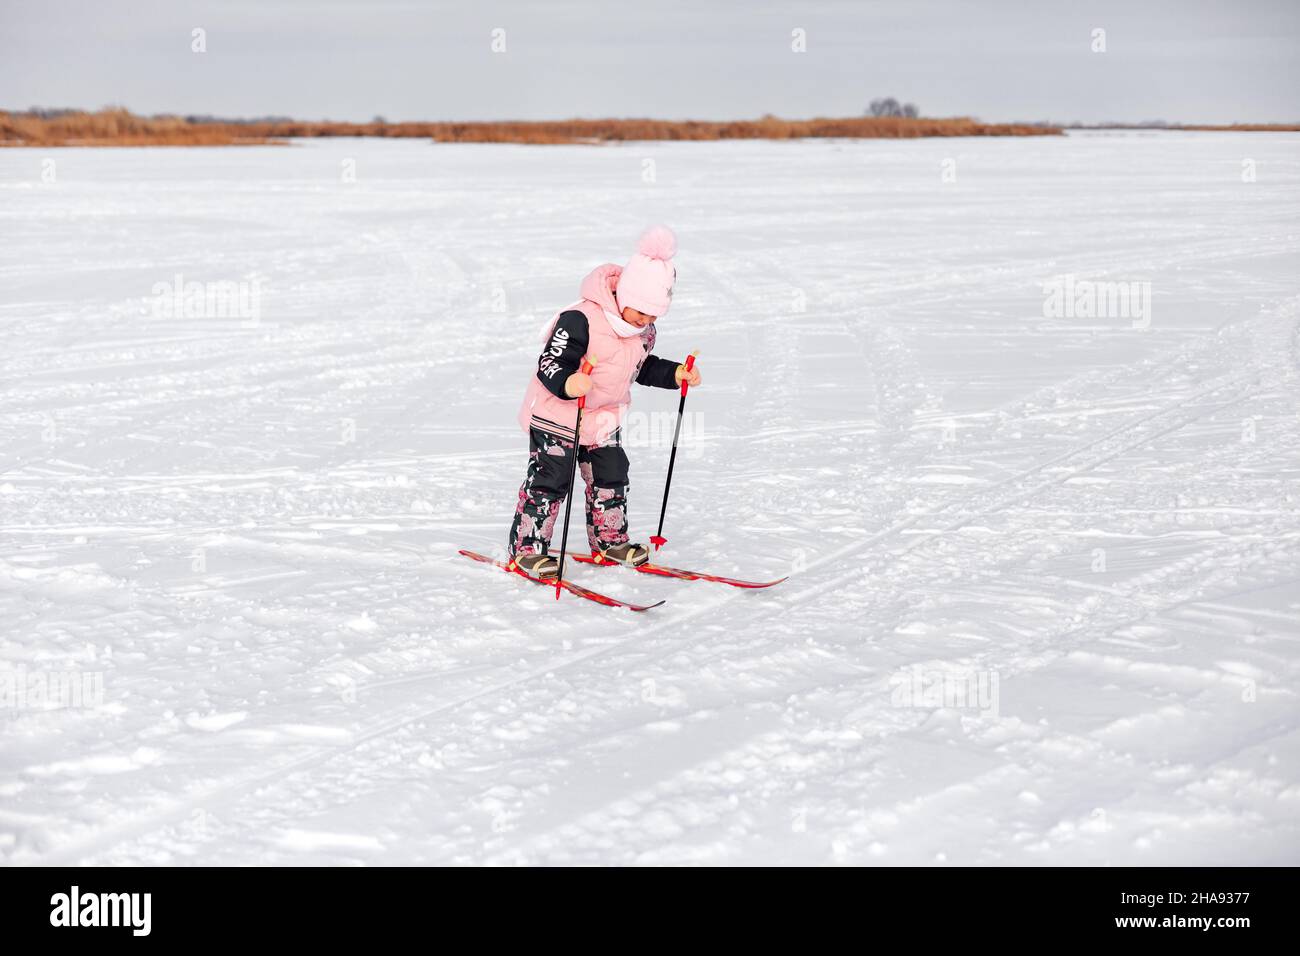 Little girl is skiing. Child in pink warm suit learns to ski snow on frosty winter day, winter landscape, snow background Stock Photo